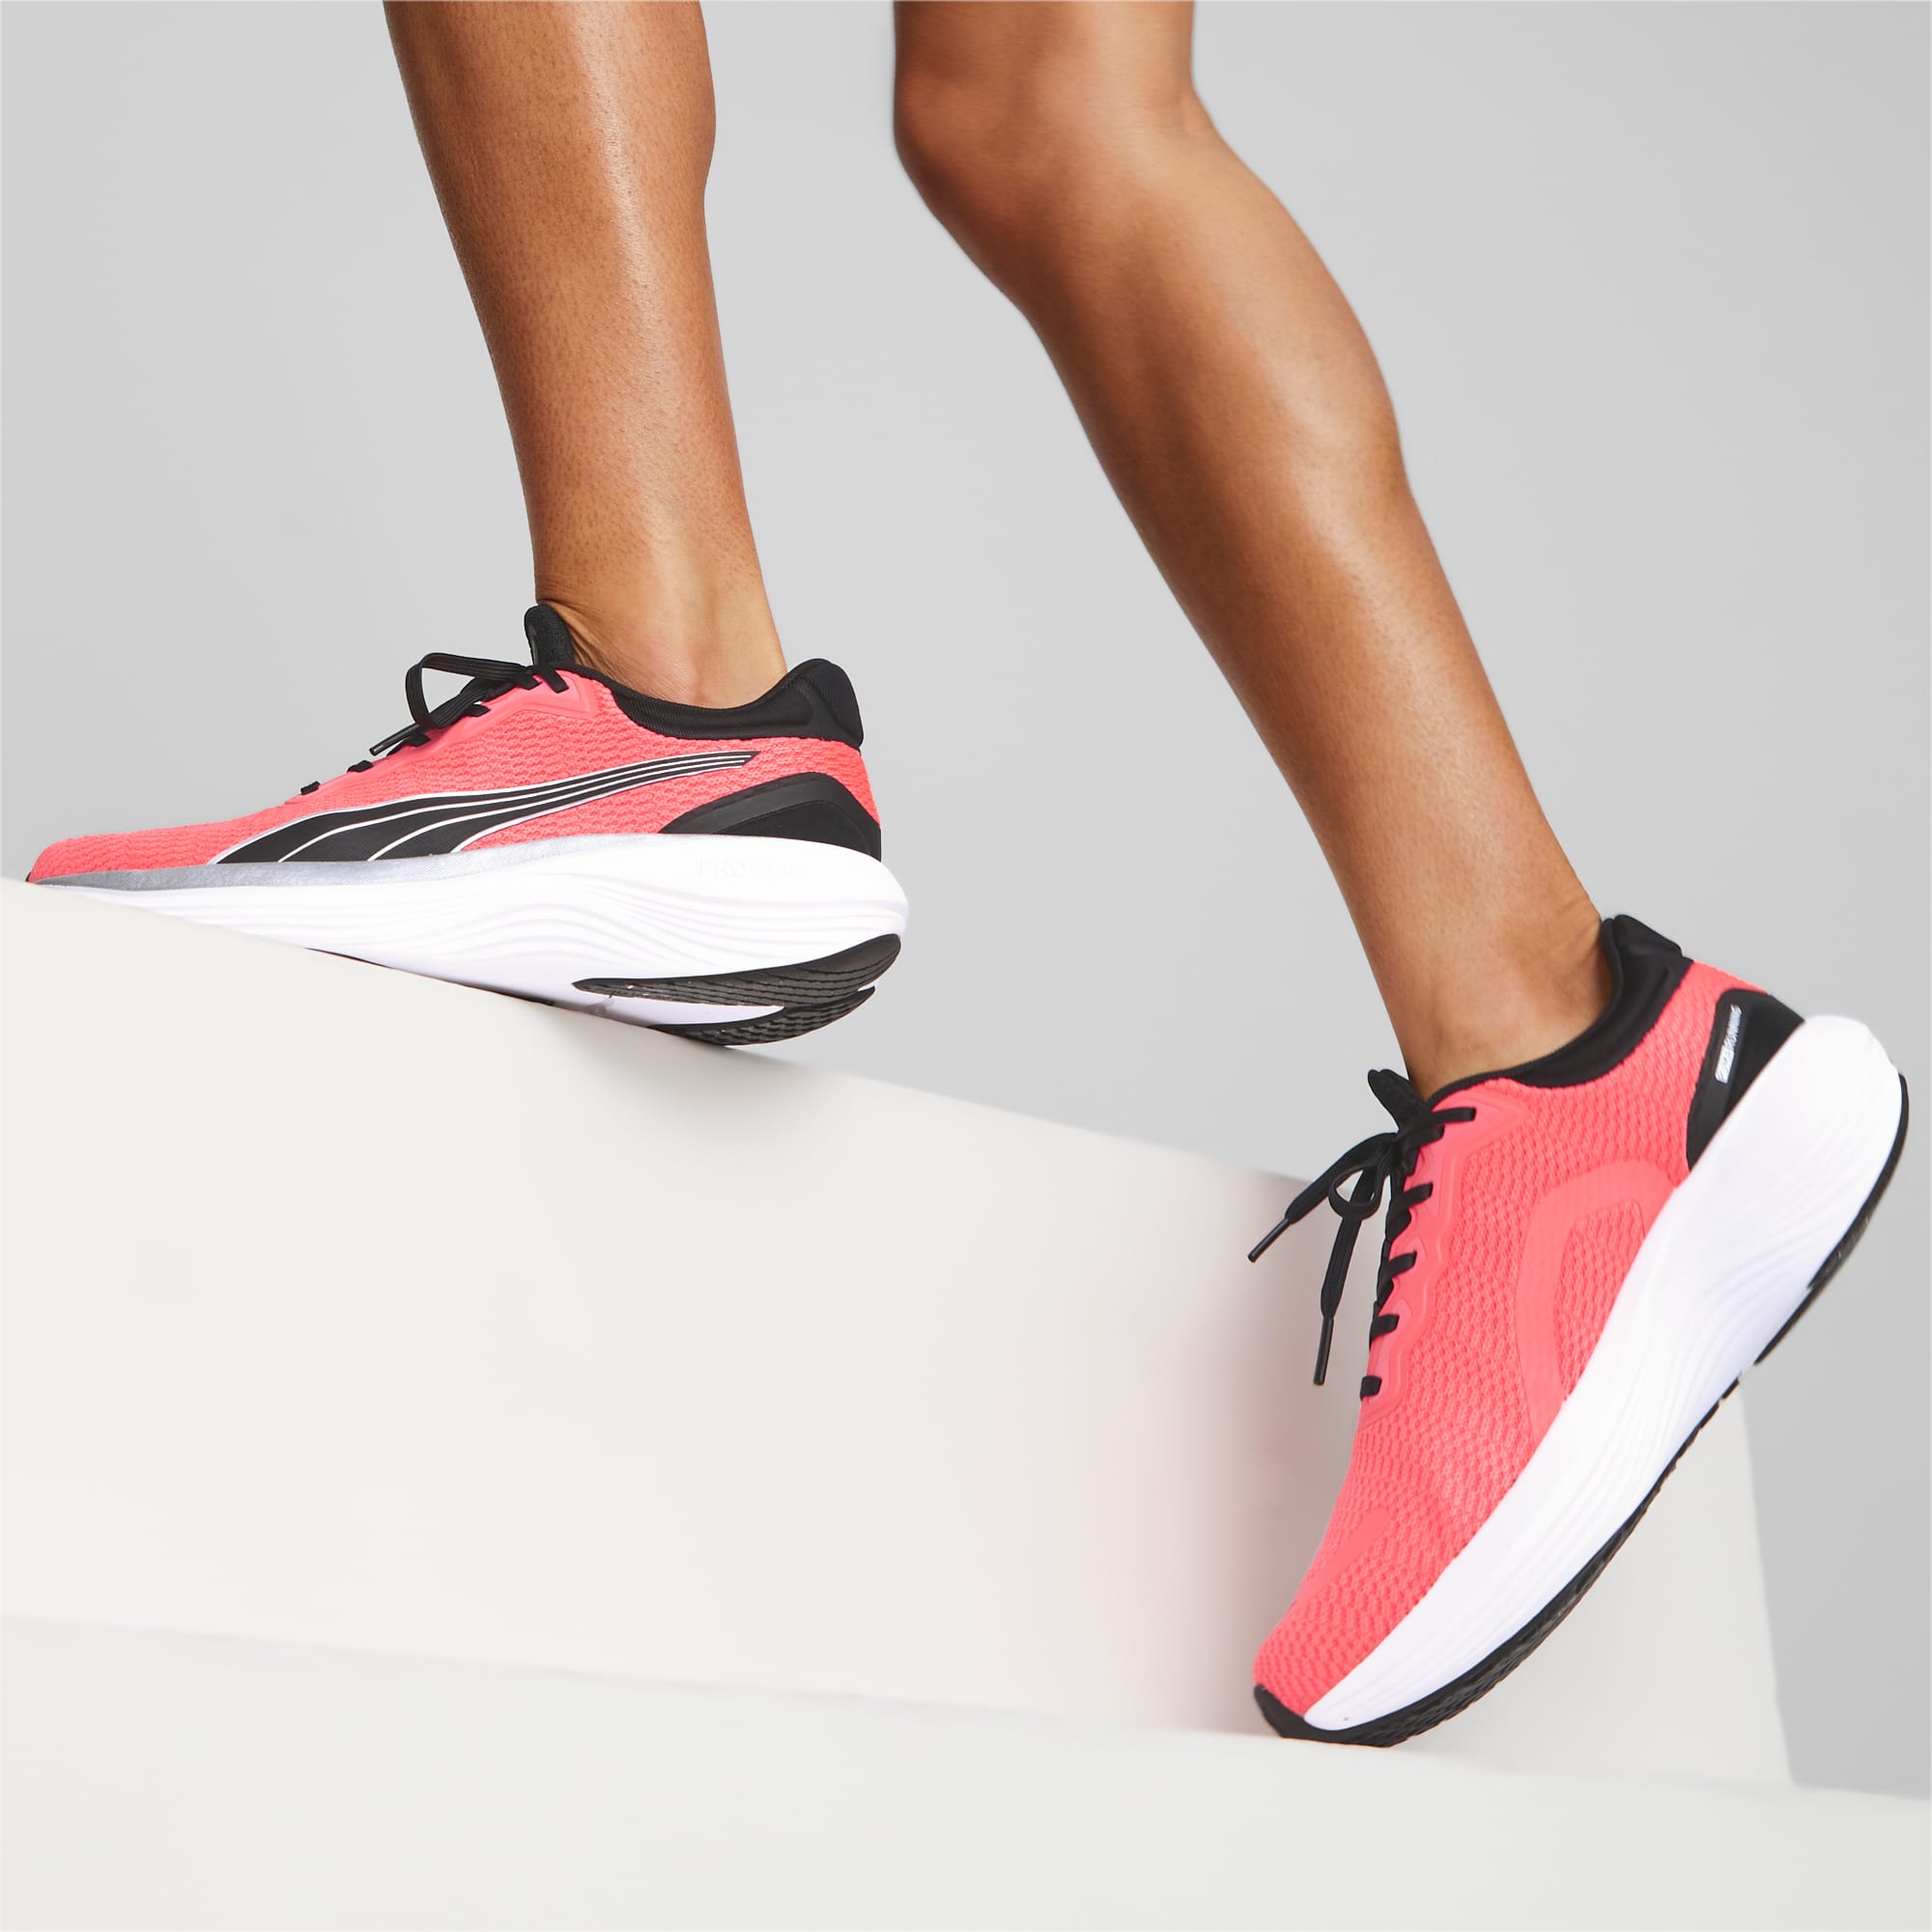 Women's PUMA Scend Pro Running Shoes, Fire Orchid/Black/White, Size 35,5, Shoes